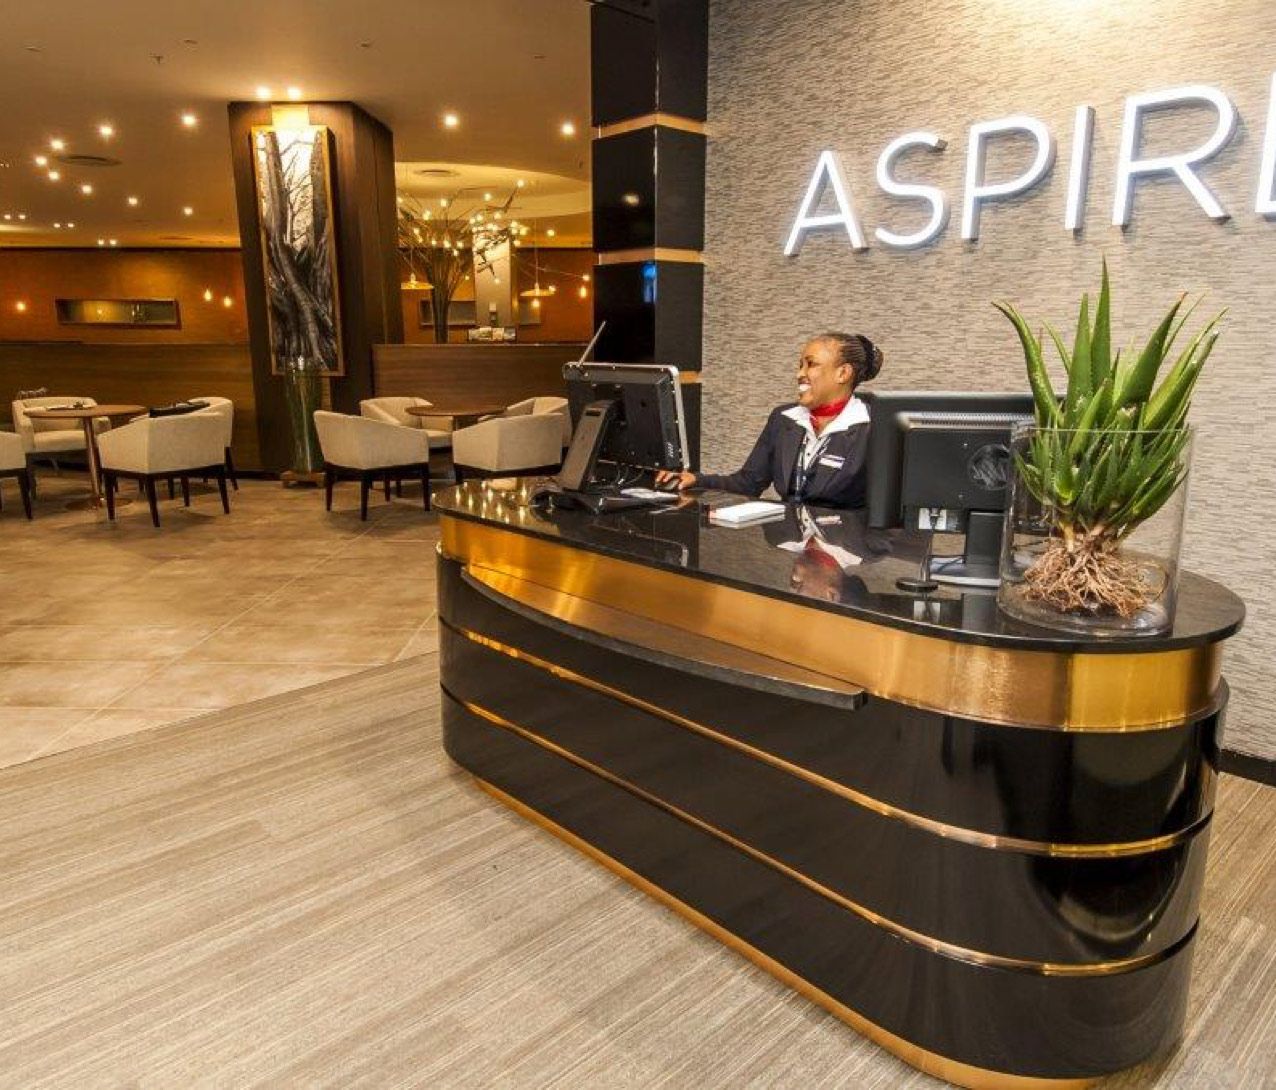 The check in desk at the Aspire Lounge inside OR Tambo Airport.